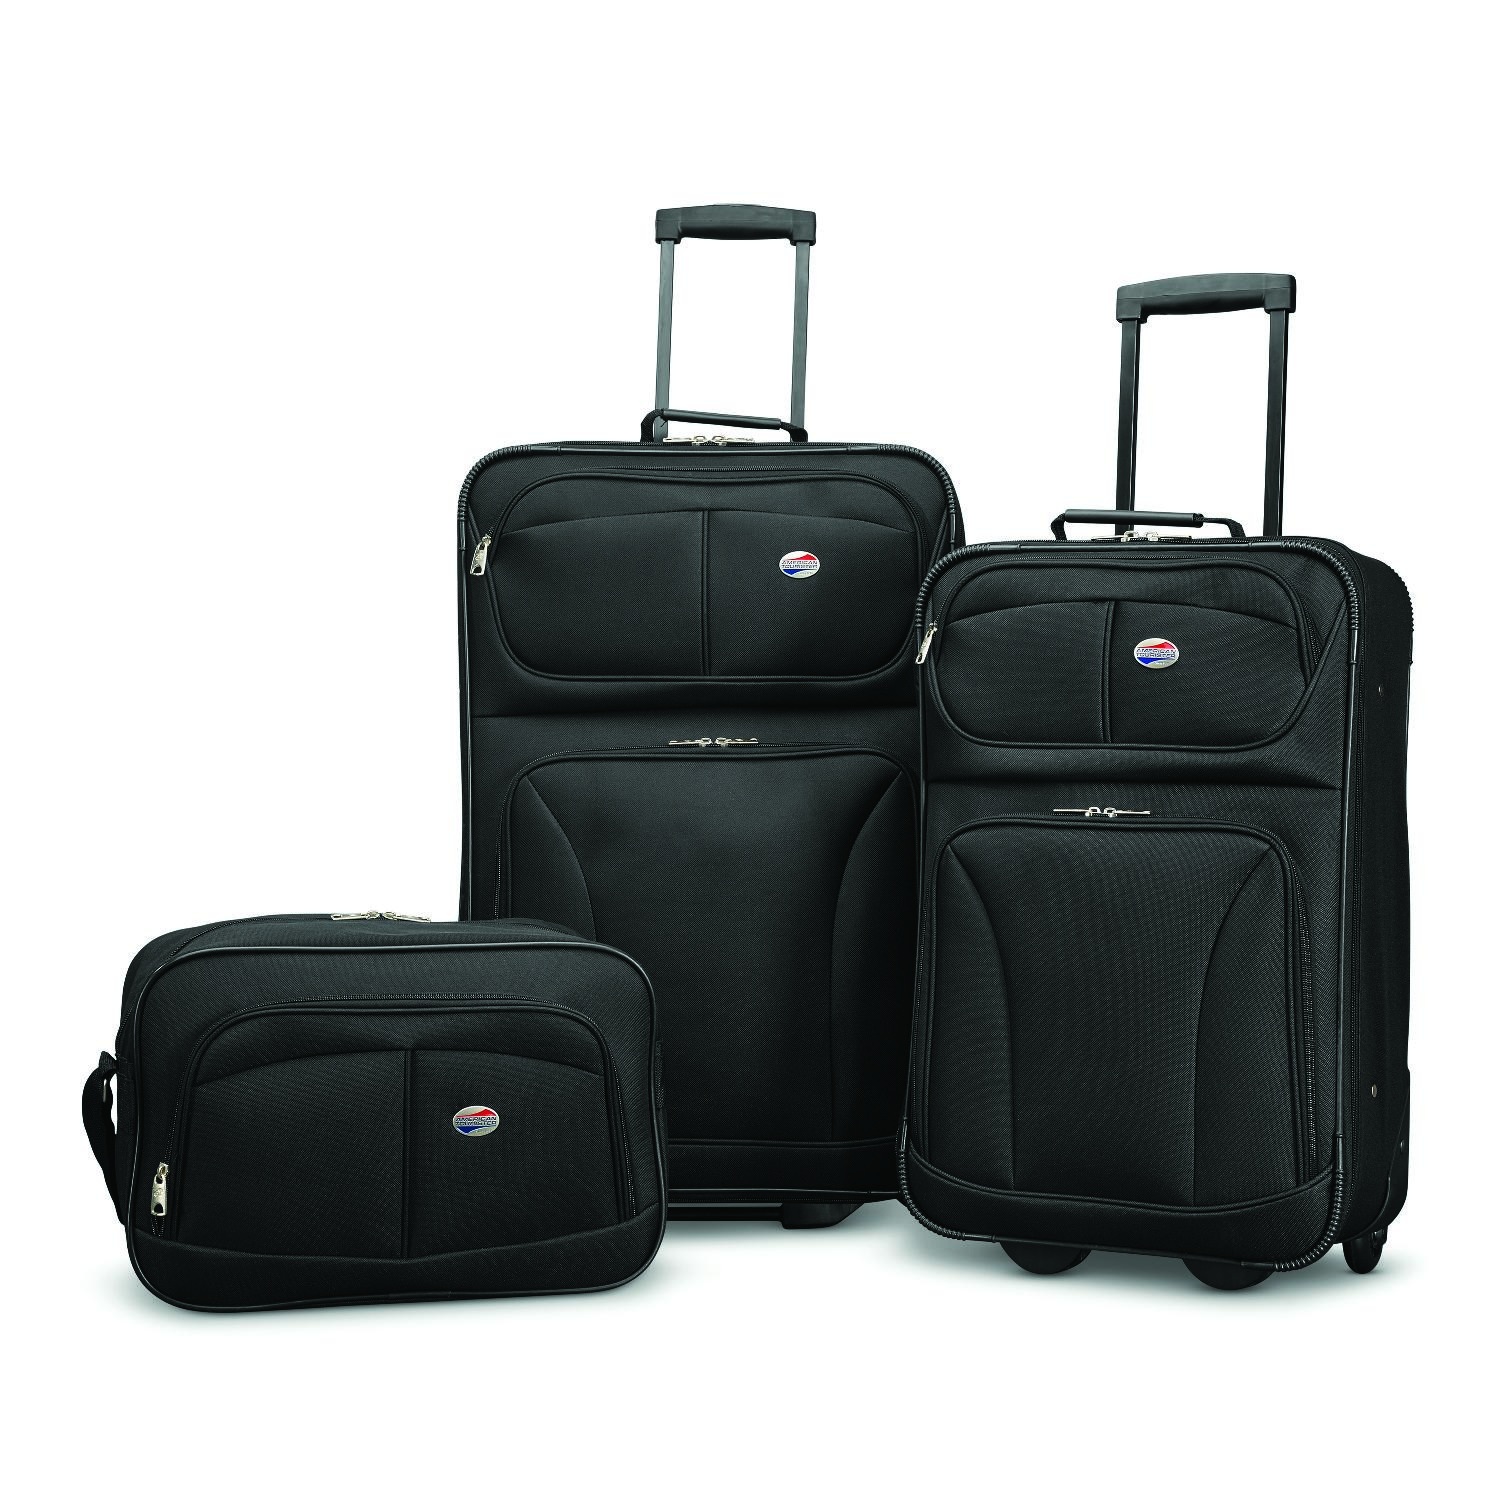 American Tourister Brewster 3 Piece Softside Luggage Set - image 1 of 9